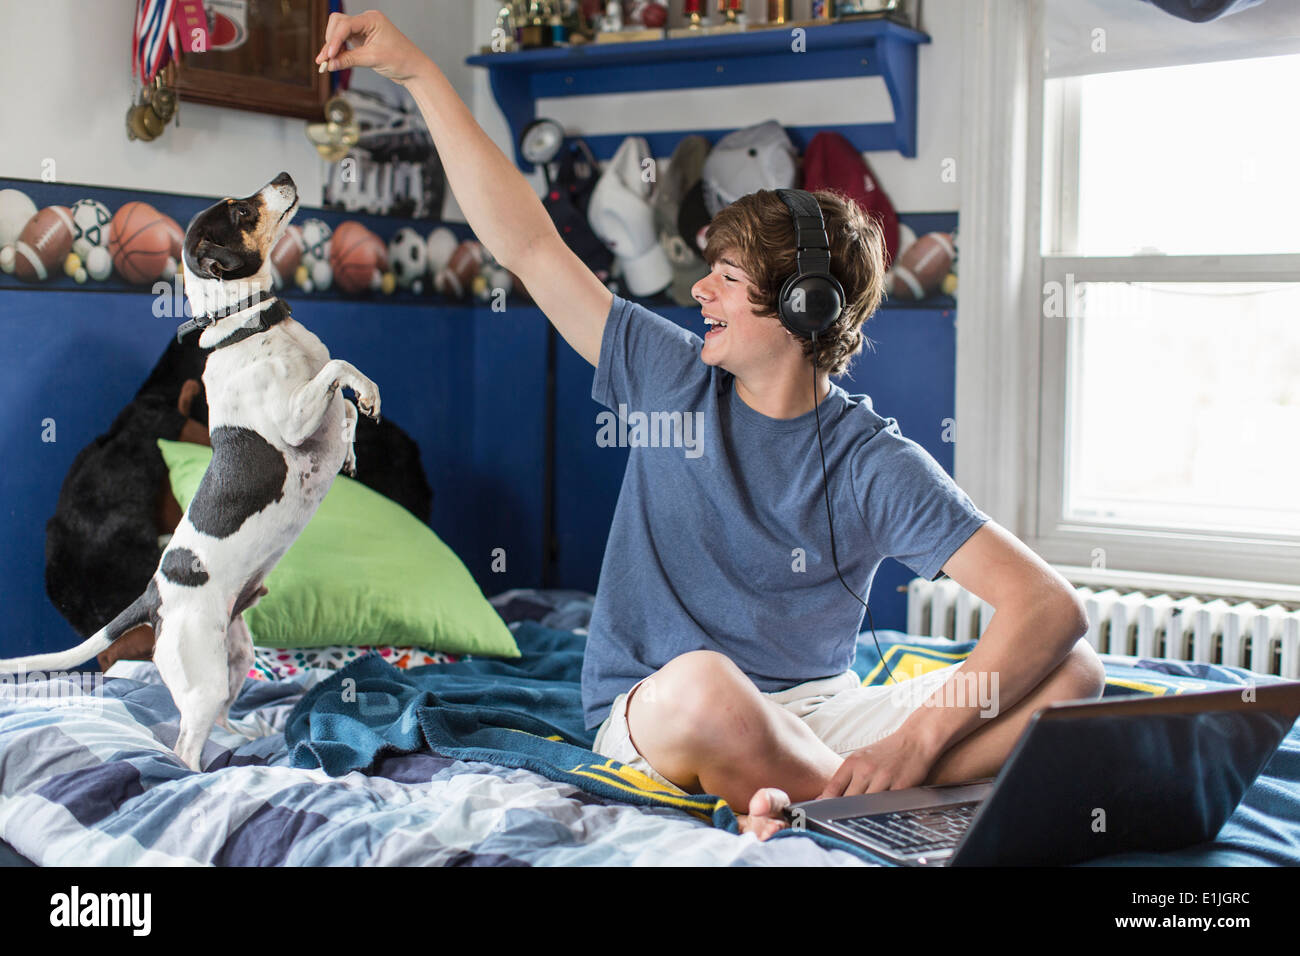 Teenage boy sitting on bed with laptop computer, Playing with dog Banque D'Images